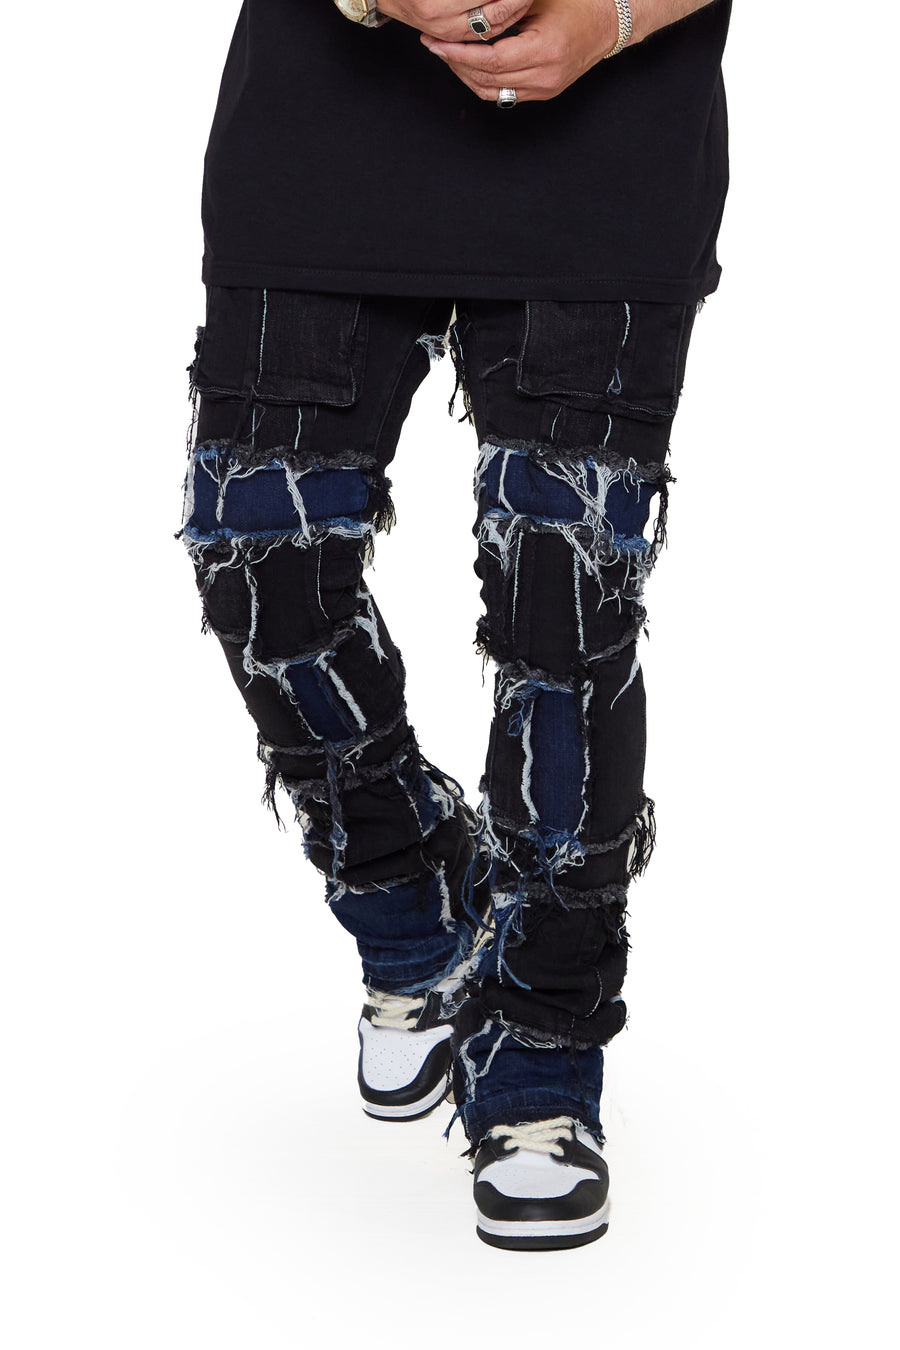 “CLUB83” BLACK STACKED FLARE JEAN